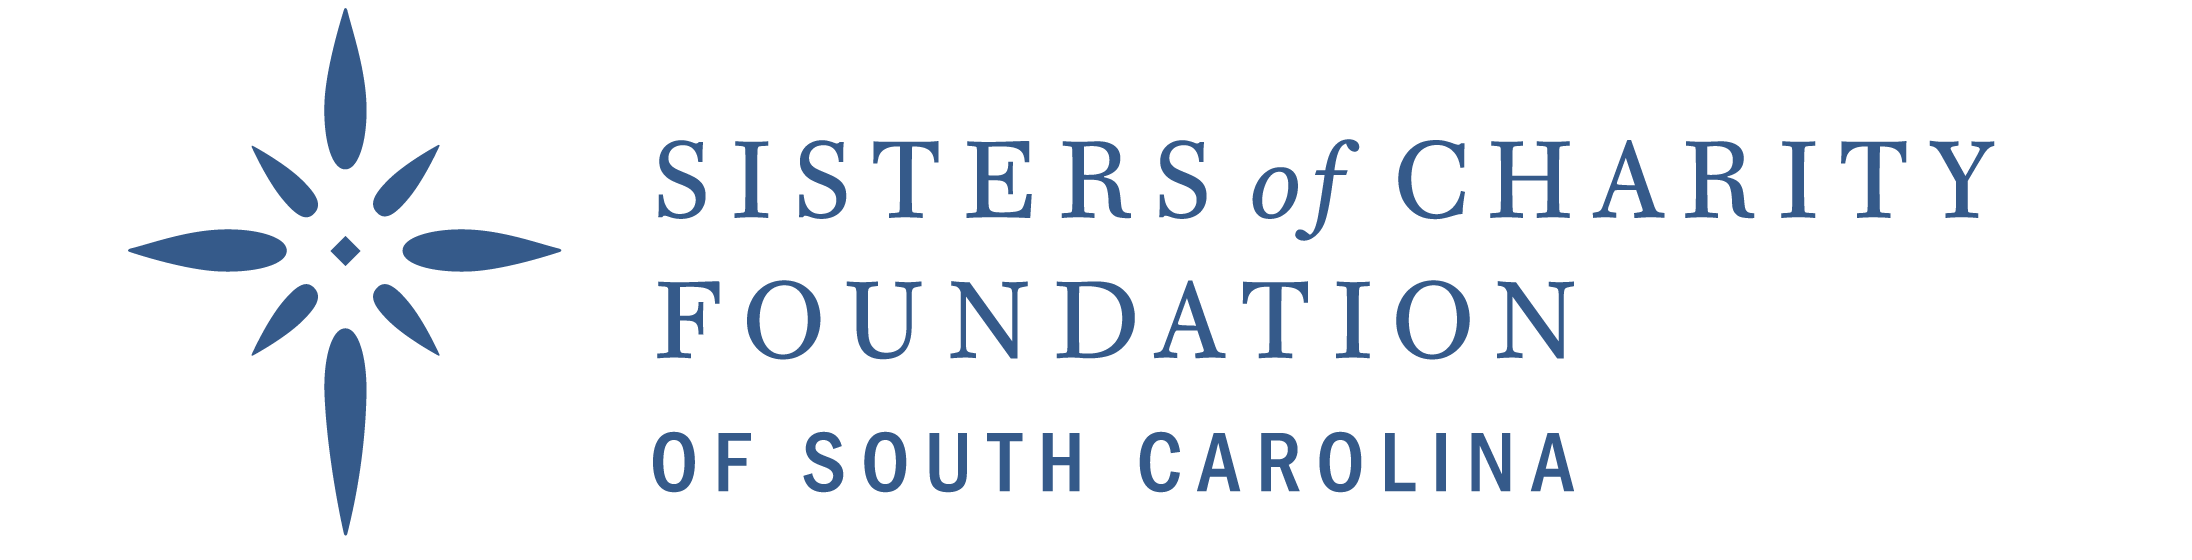 Sisters of Charity Foundation SC